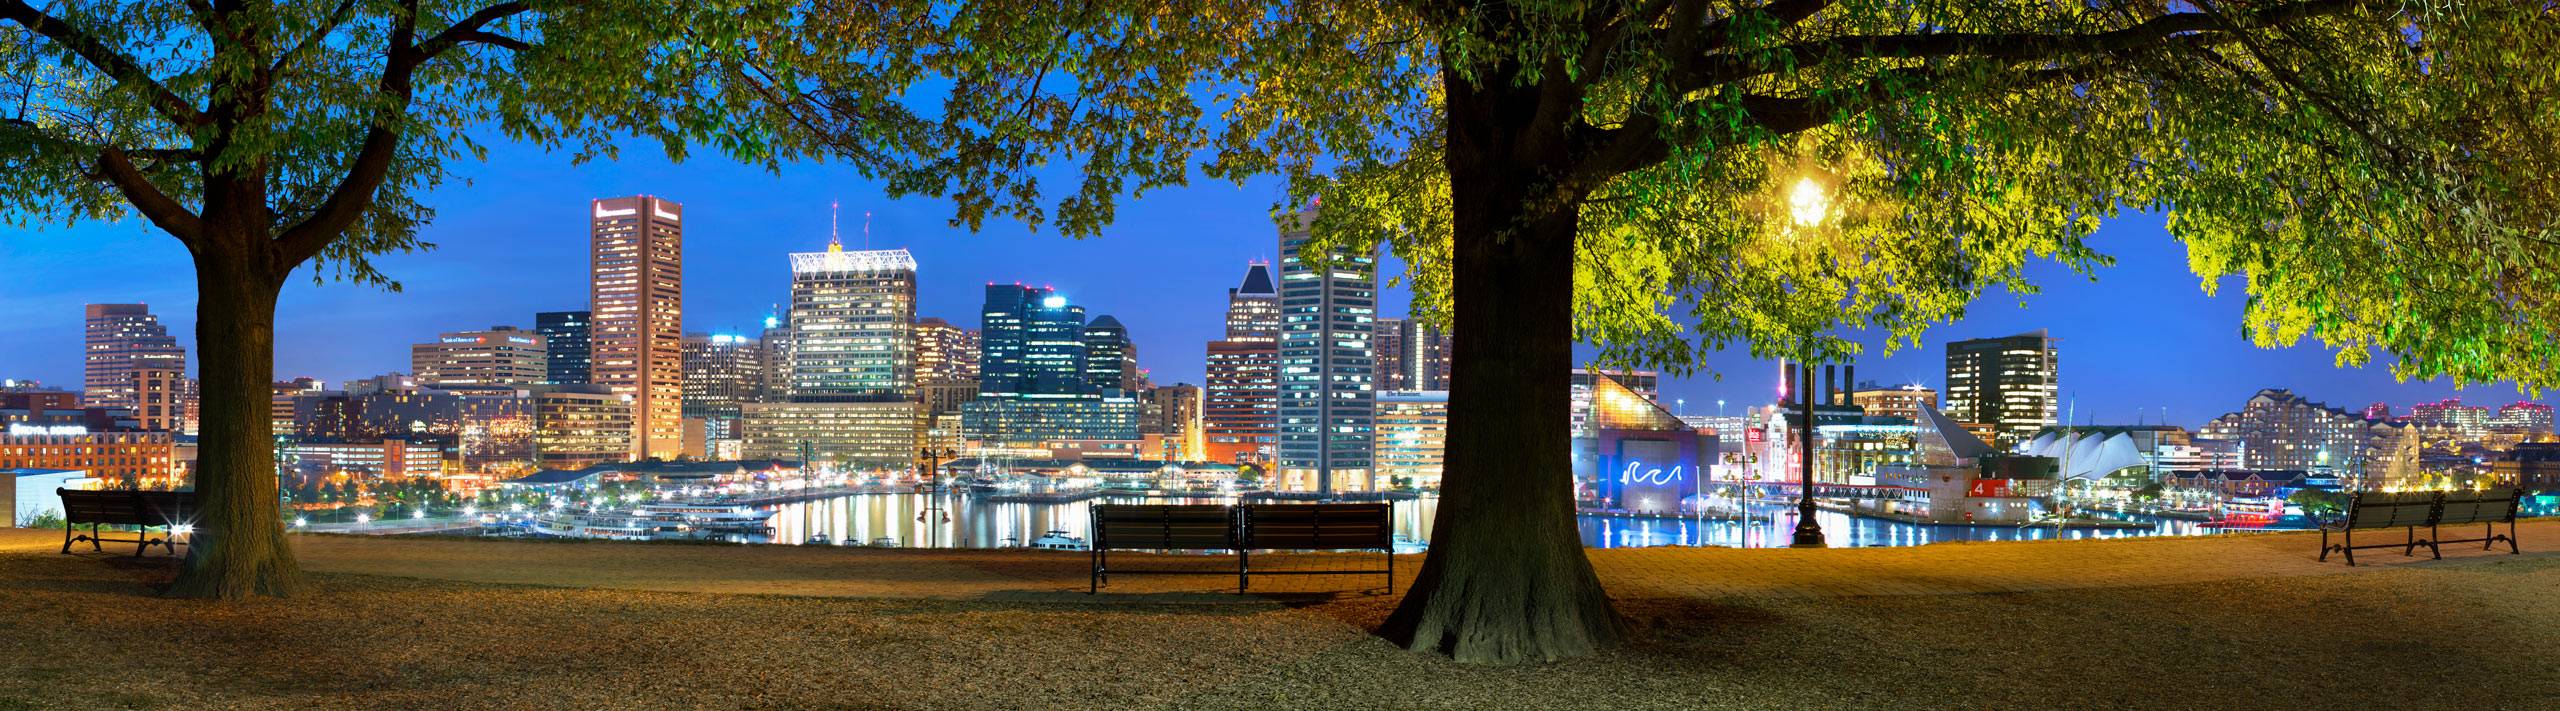 Federal Hill Park Benches and View of Downtown Baltimore